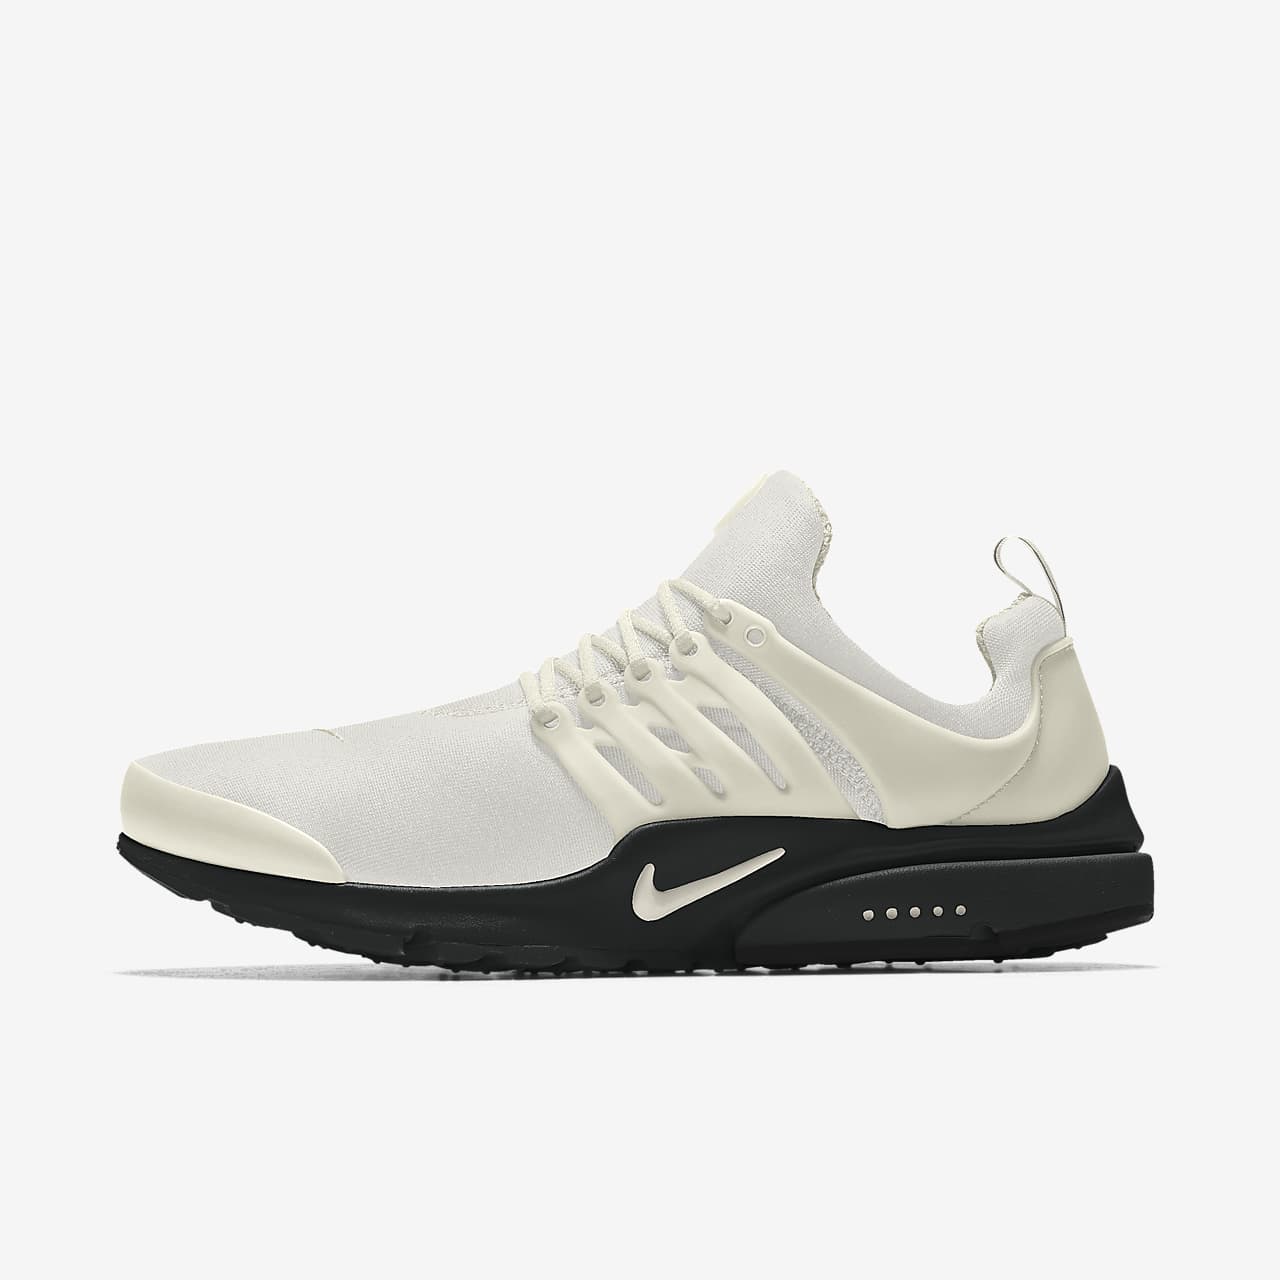 Chaussure personnalisable Nike Air Presto By You pour Femme